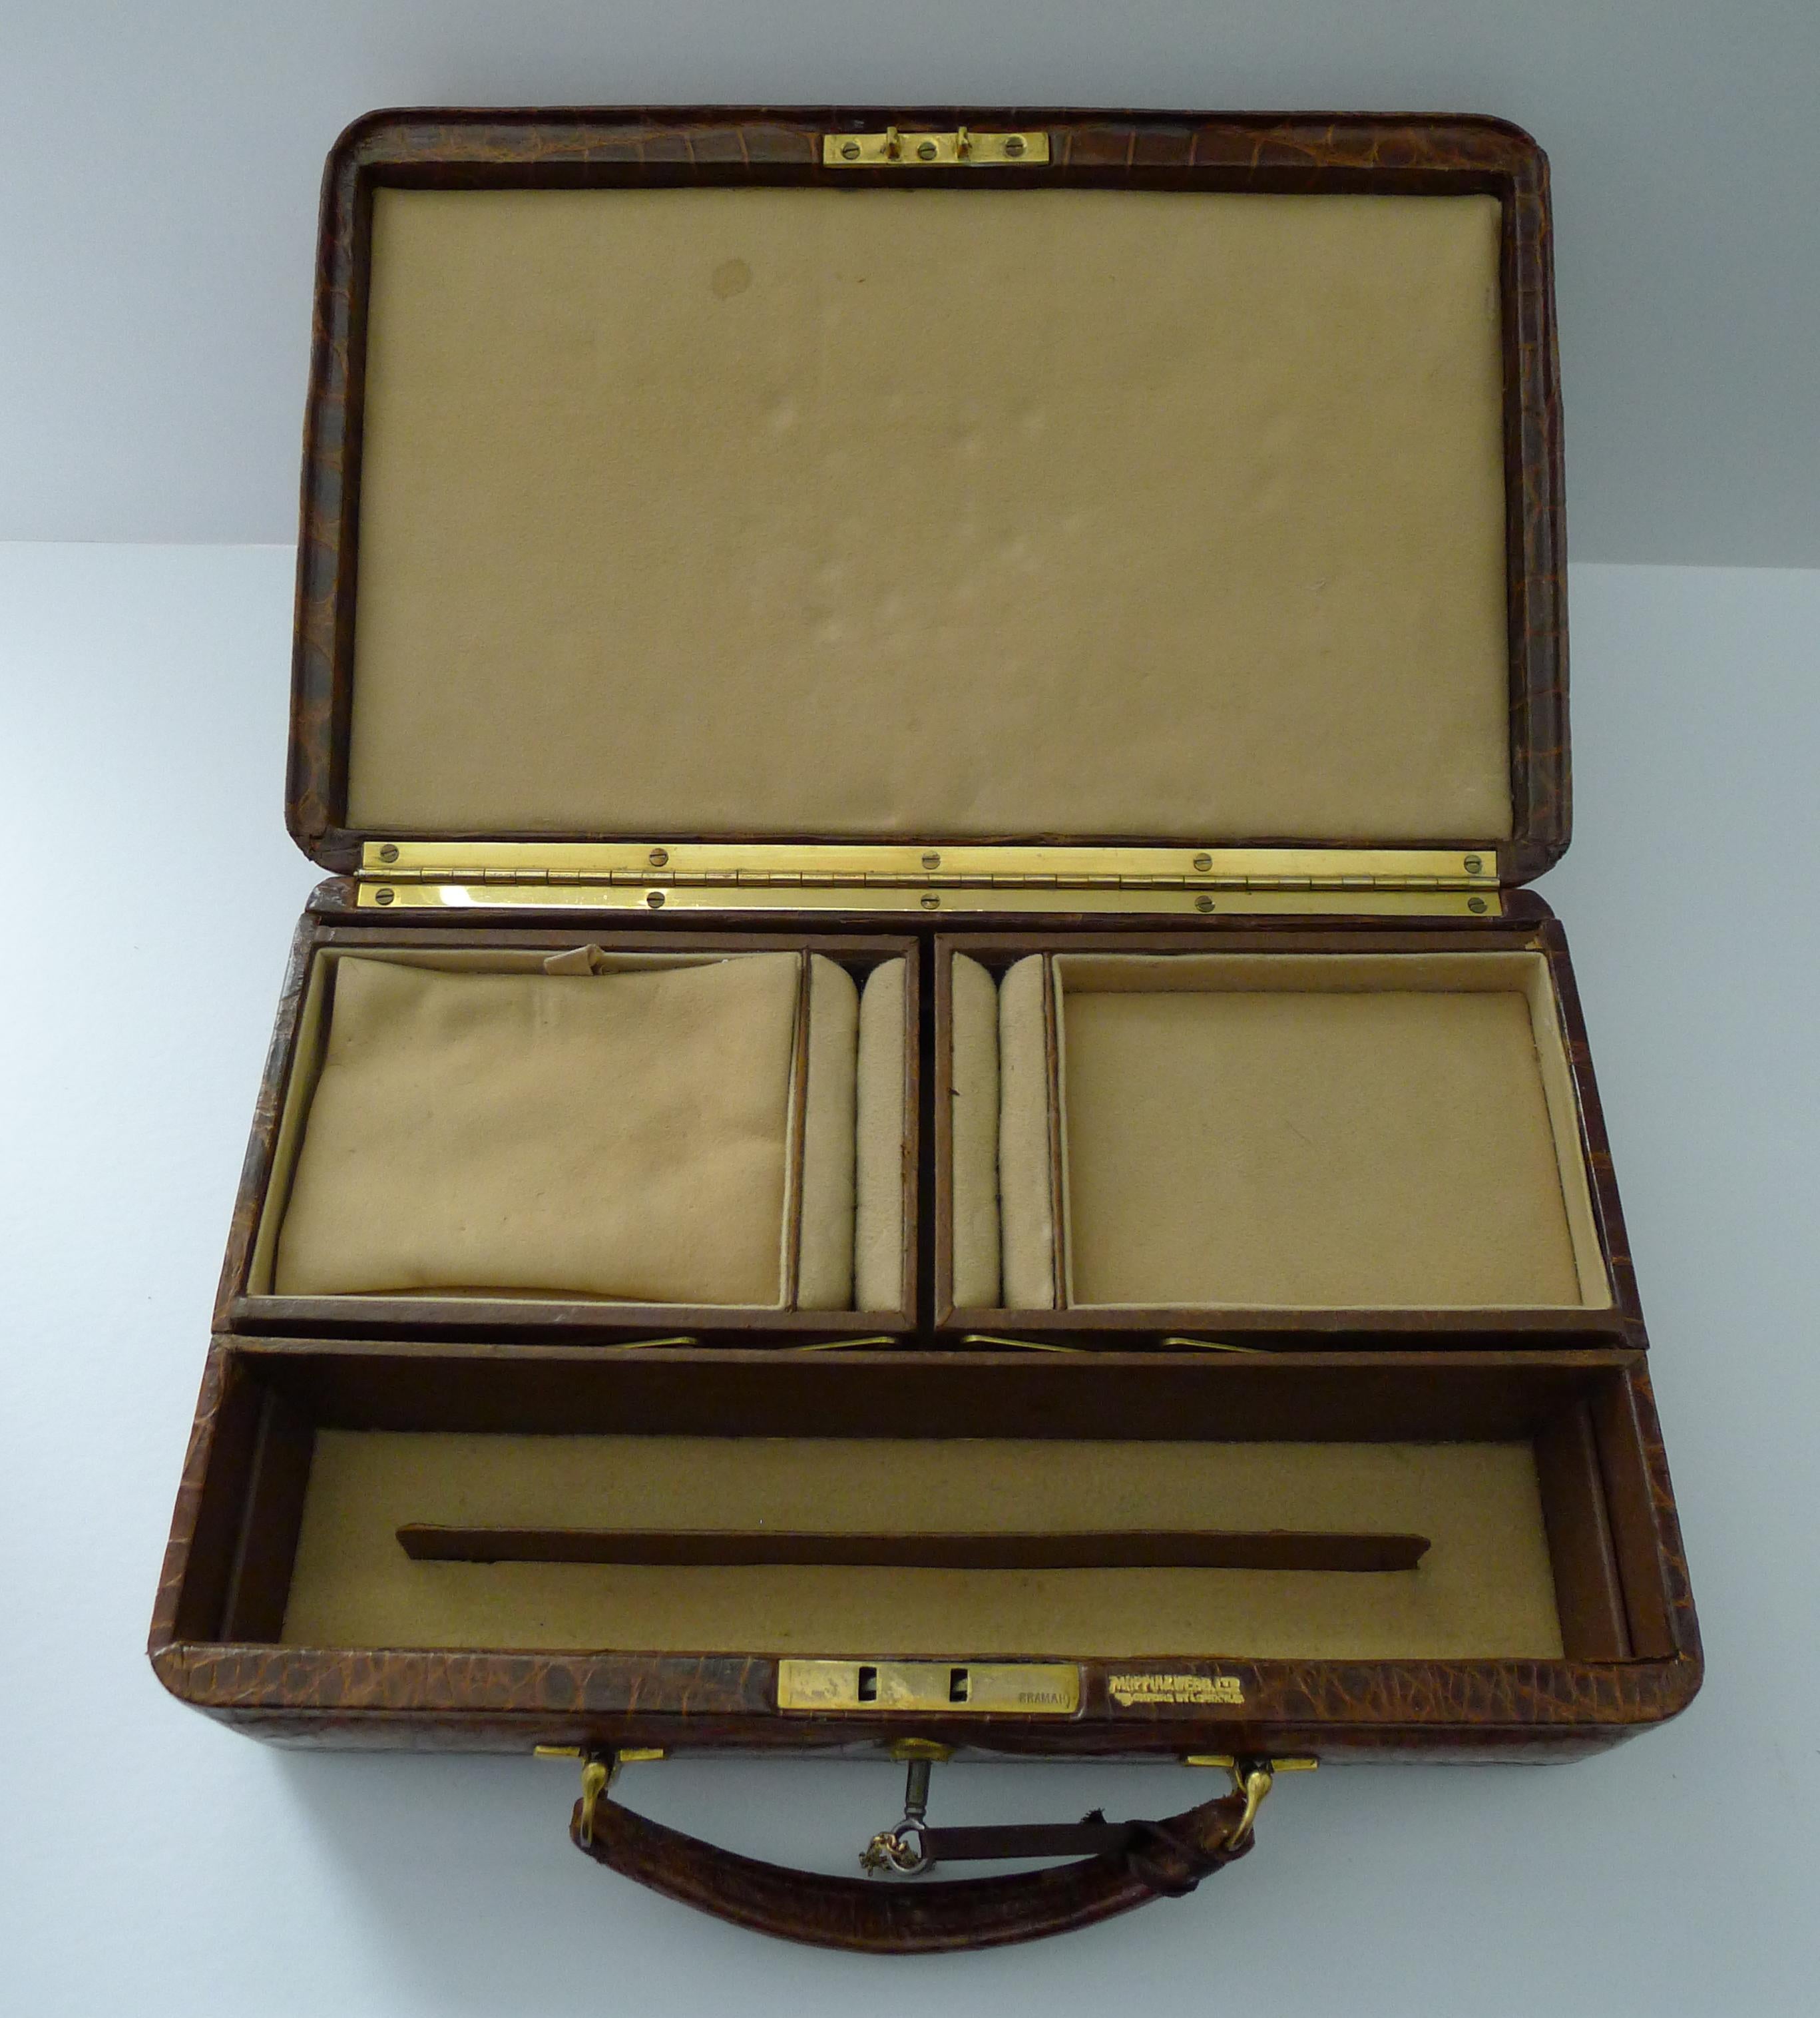 Early 20th Century Superb Antique English Crocodile Jewelry Box by Mappin & Webb For Sale